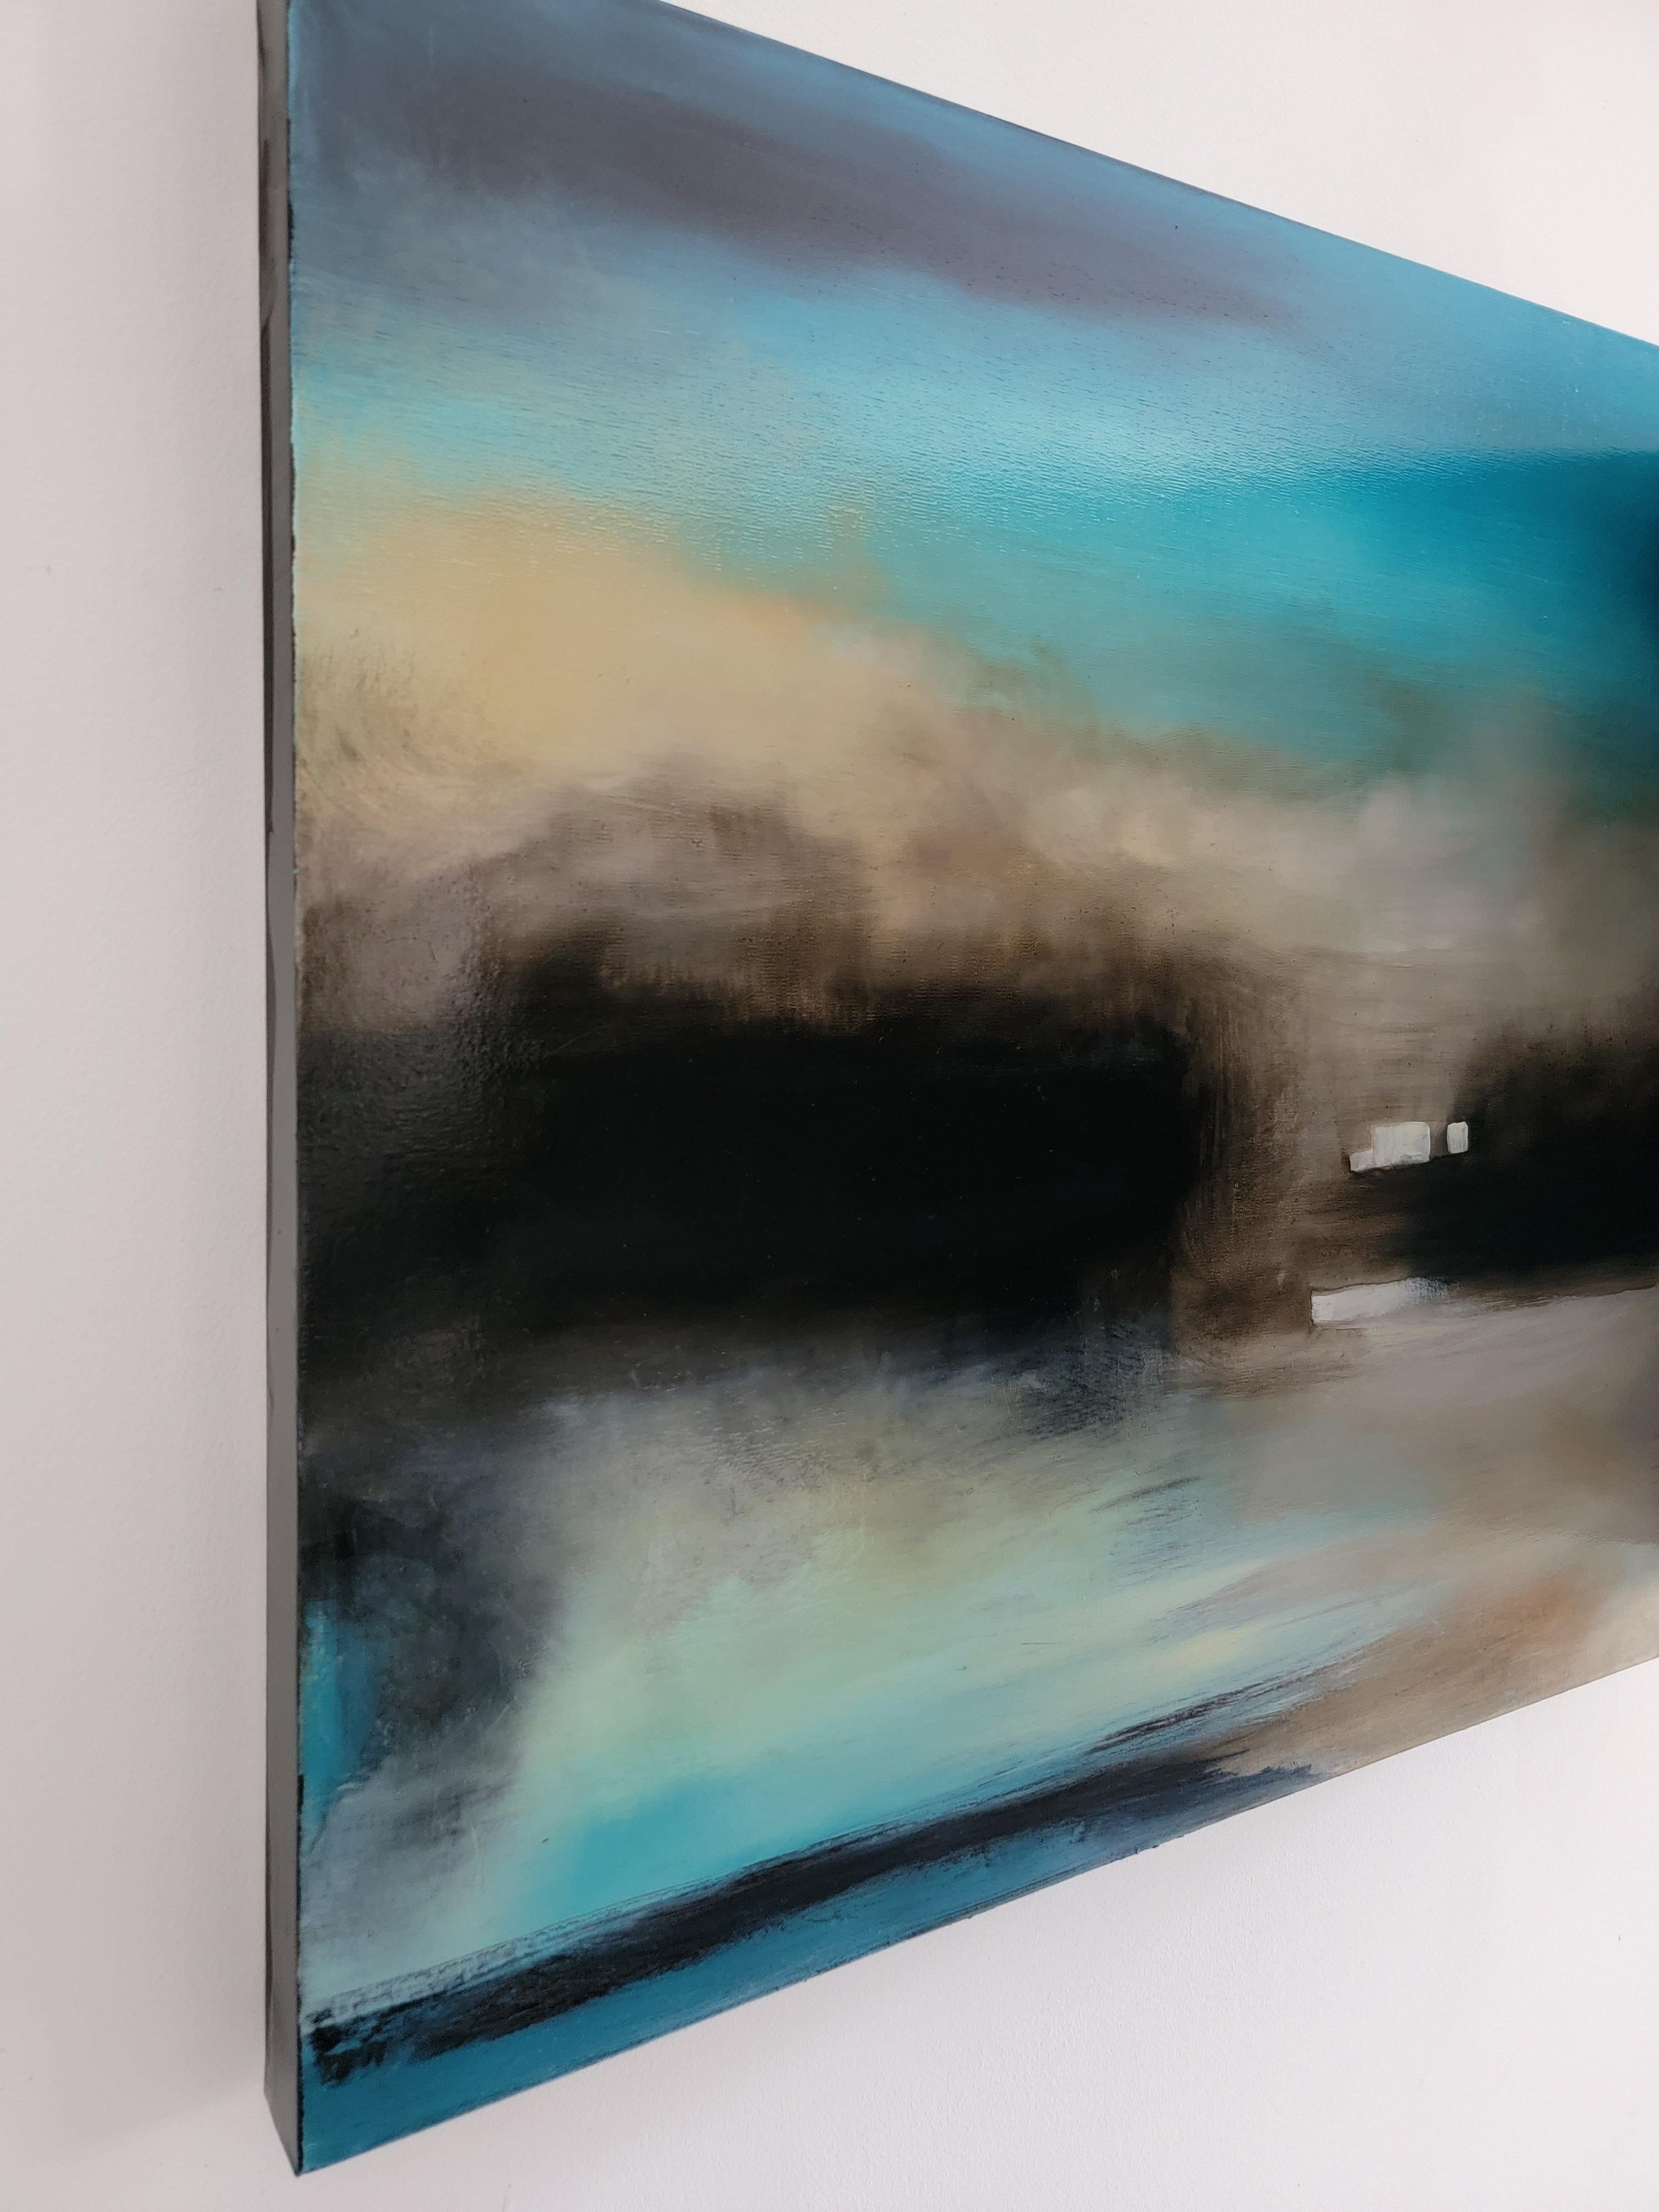 “The Quiet Spot 3” is a 25 x 25 x 1.5 inch oil painting on linen canvas by Anita Loomis that offers a sultry and dreamlike abstract landscape at twilight. With a modern romantic sensibility, the rich aqua blue tones, the composition speaks to stolen